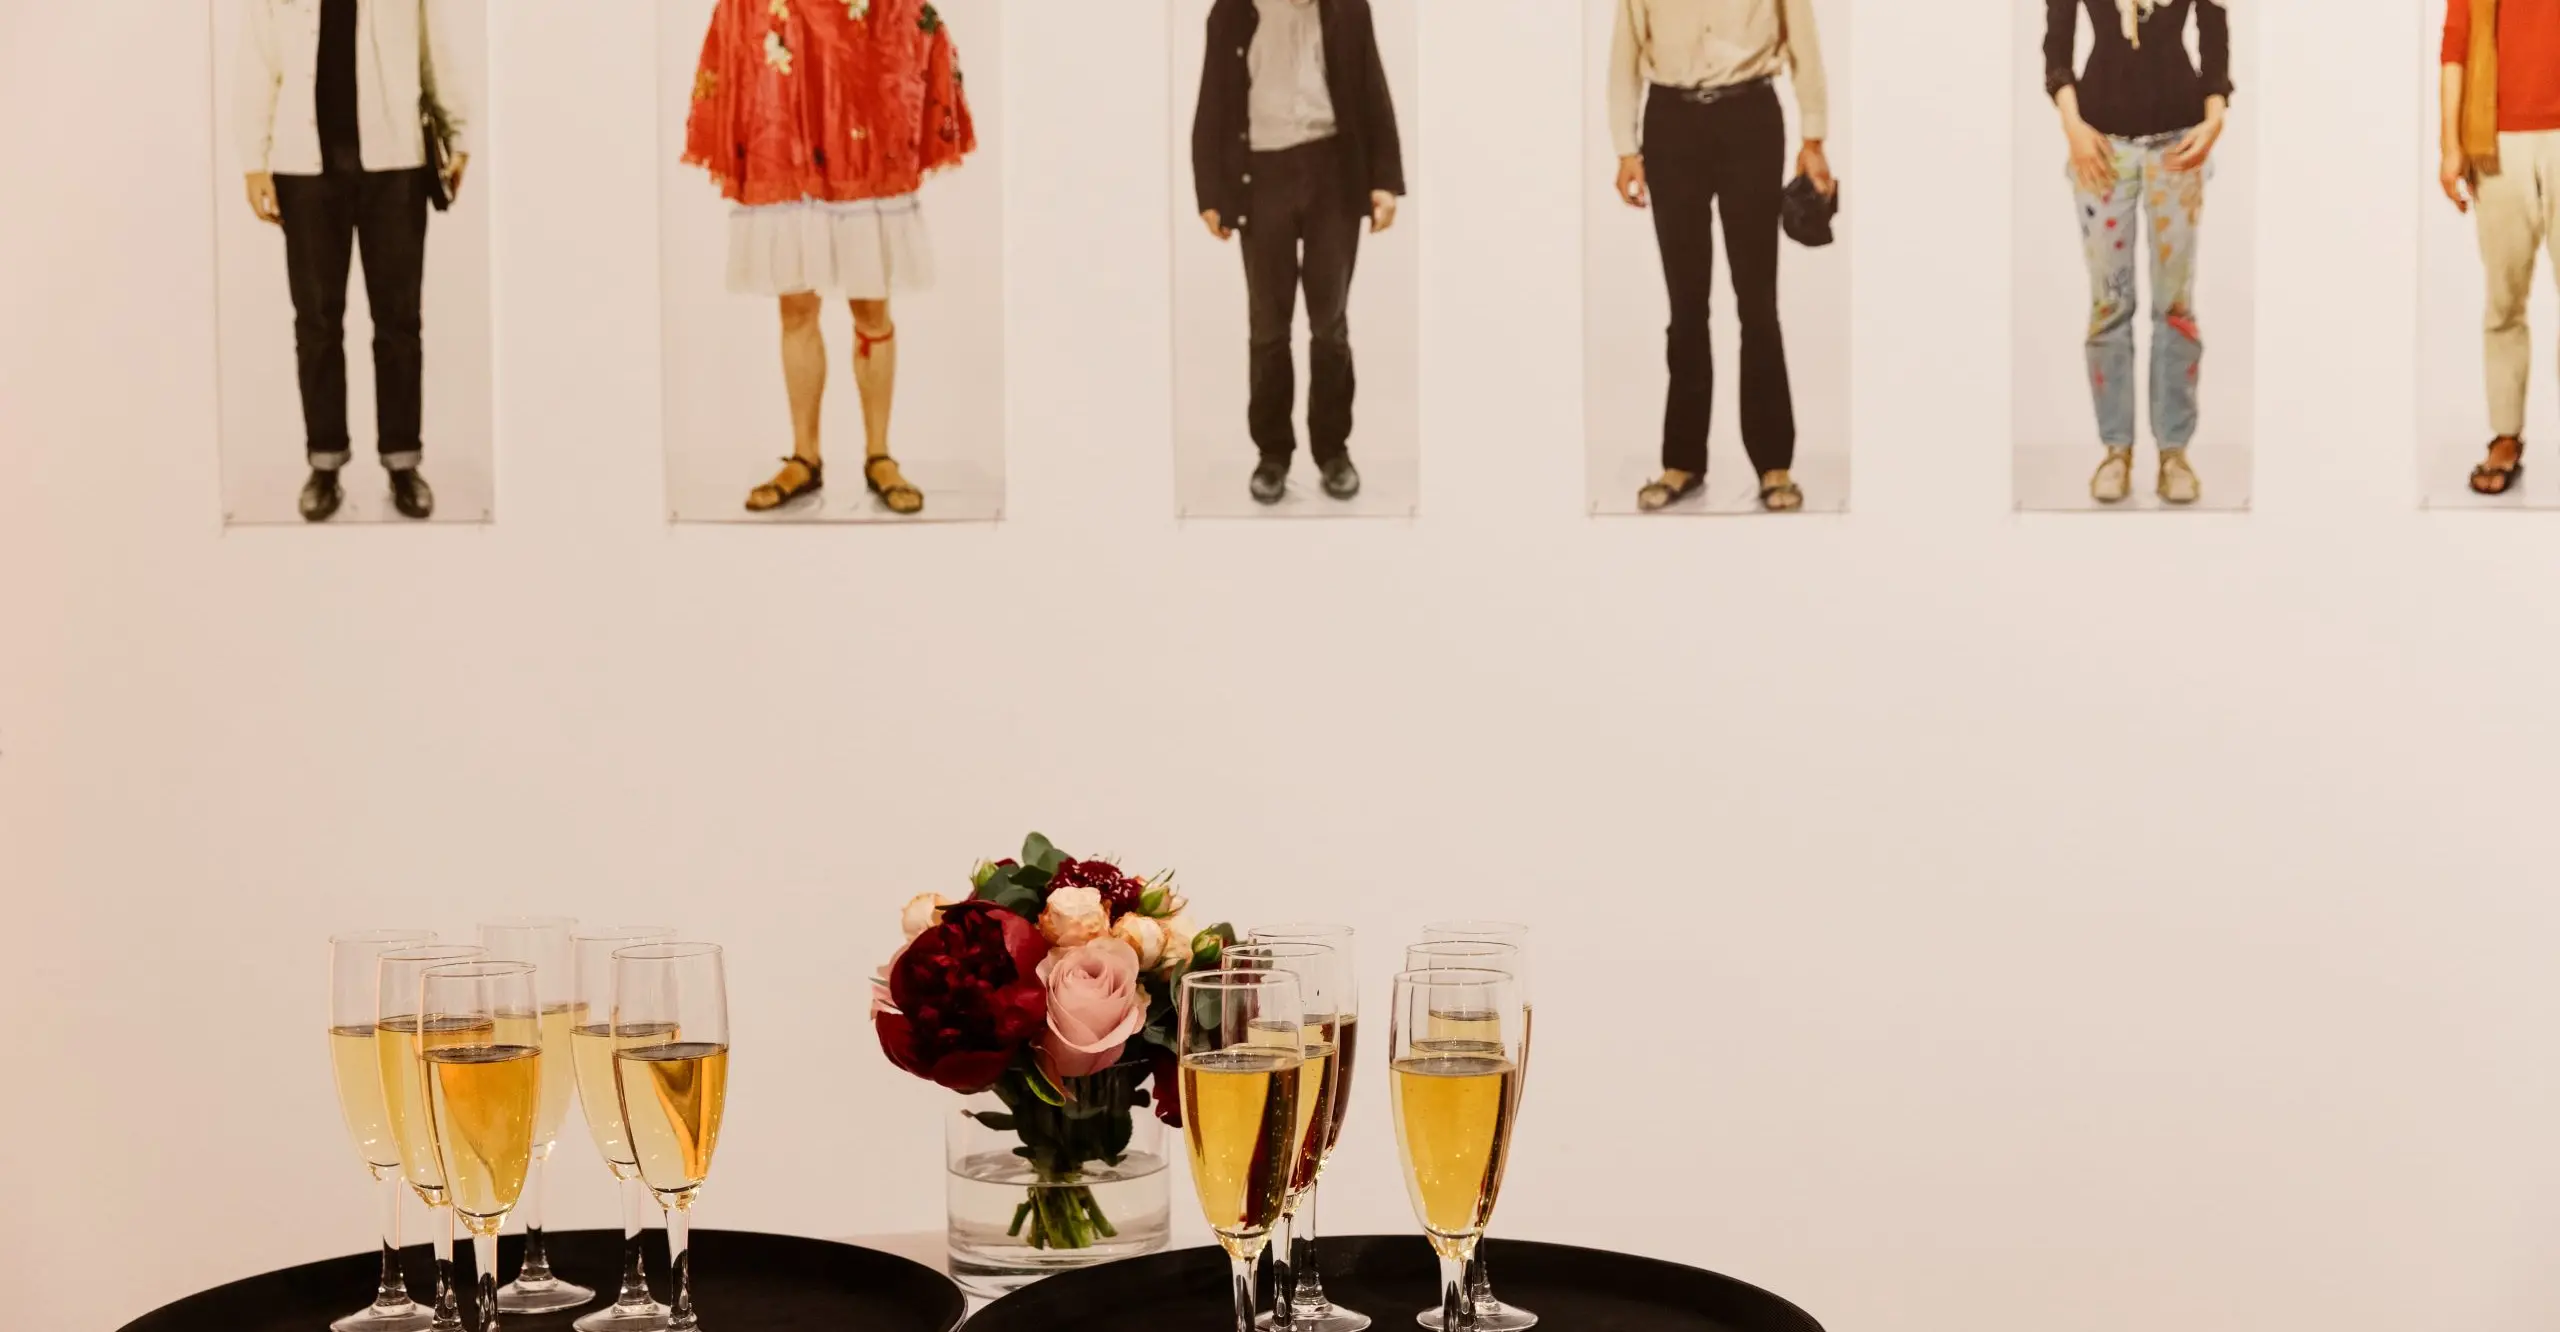 A photograph of two trays with champagne glasses on them, a bunch of flowers and an exhibition in the background